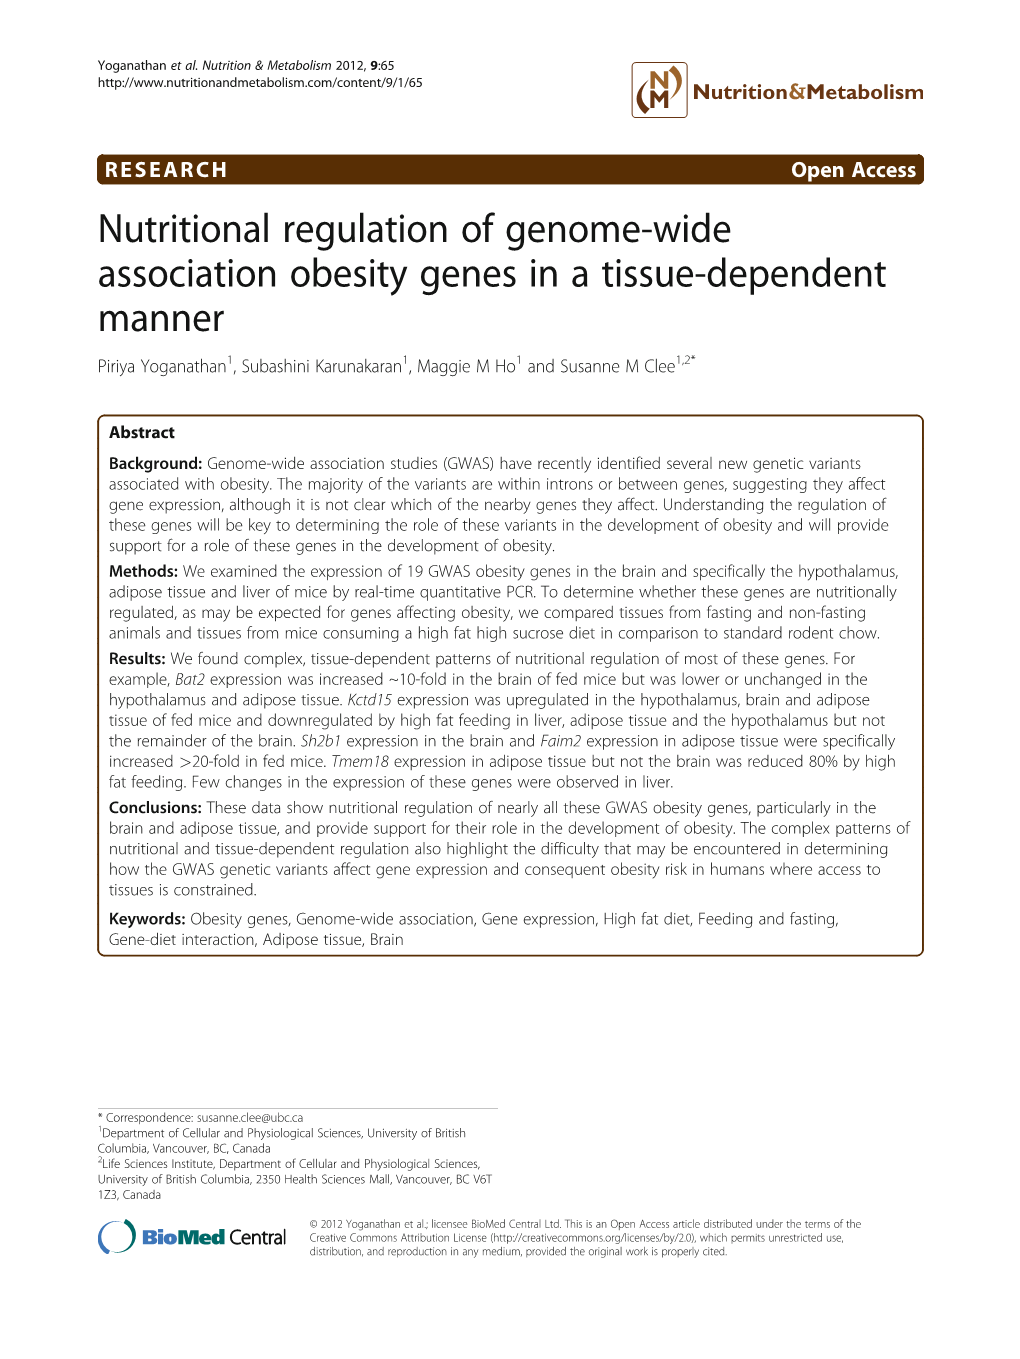 Nutritional Regulation of Genome-Wide Association Obesity Genes in A